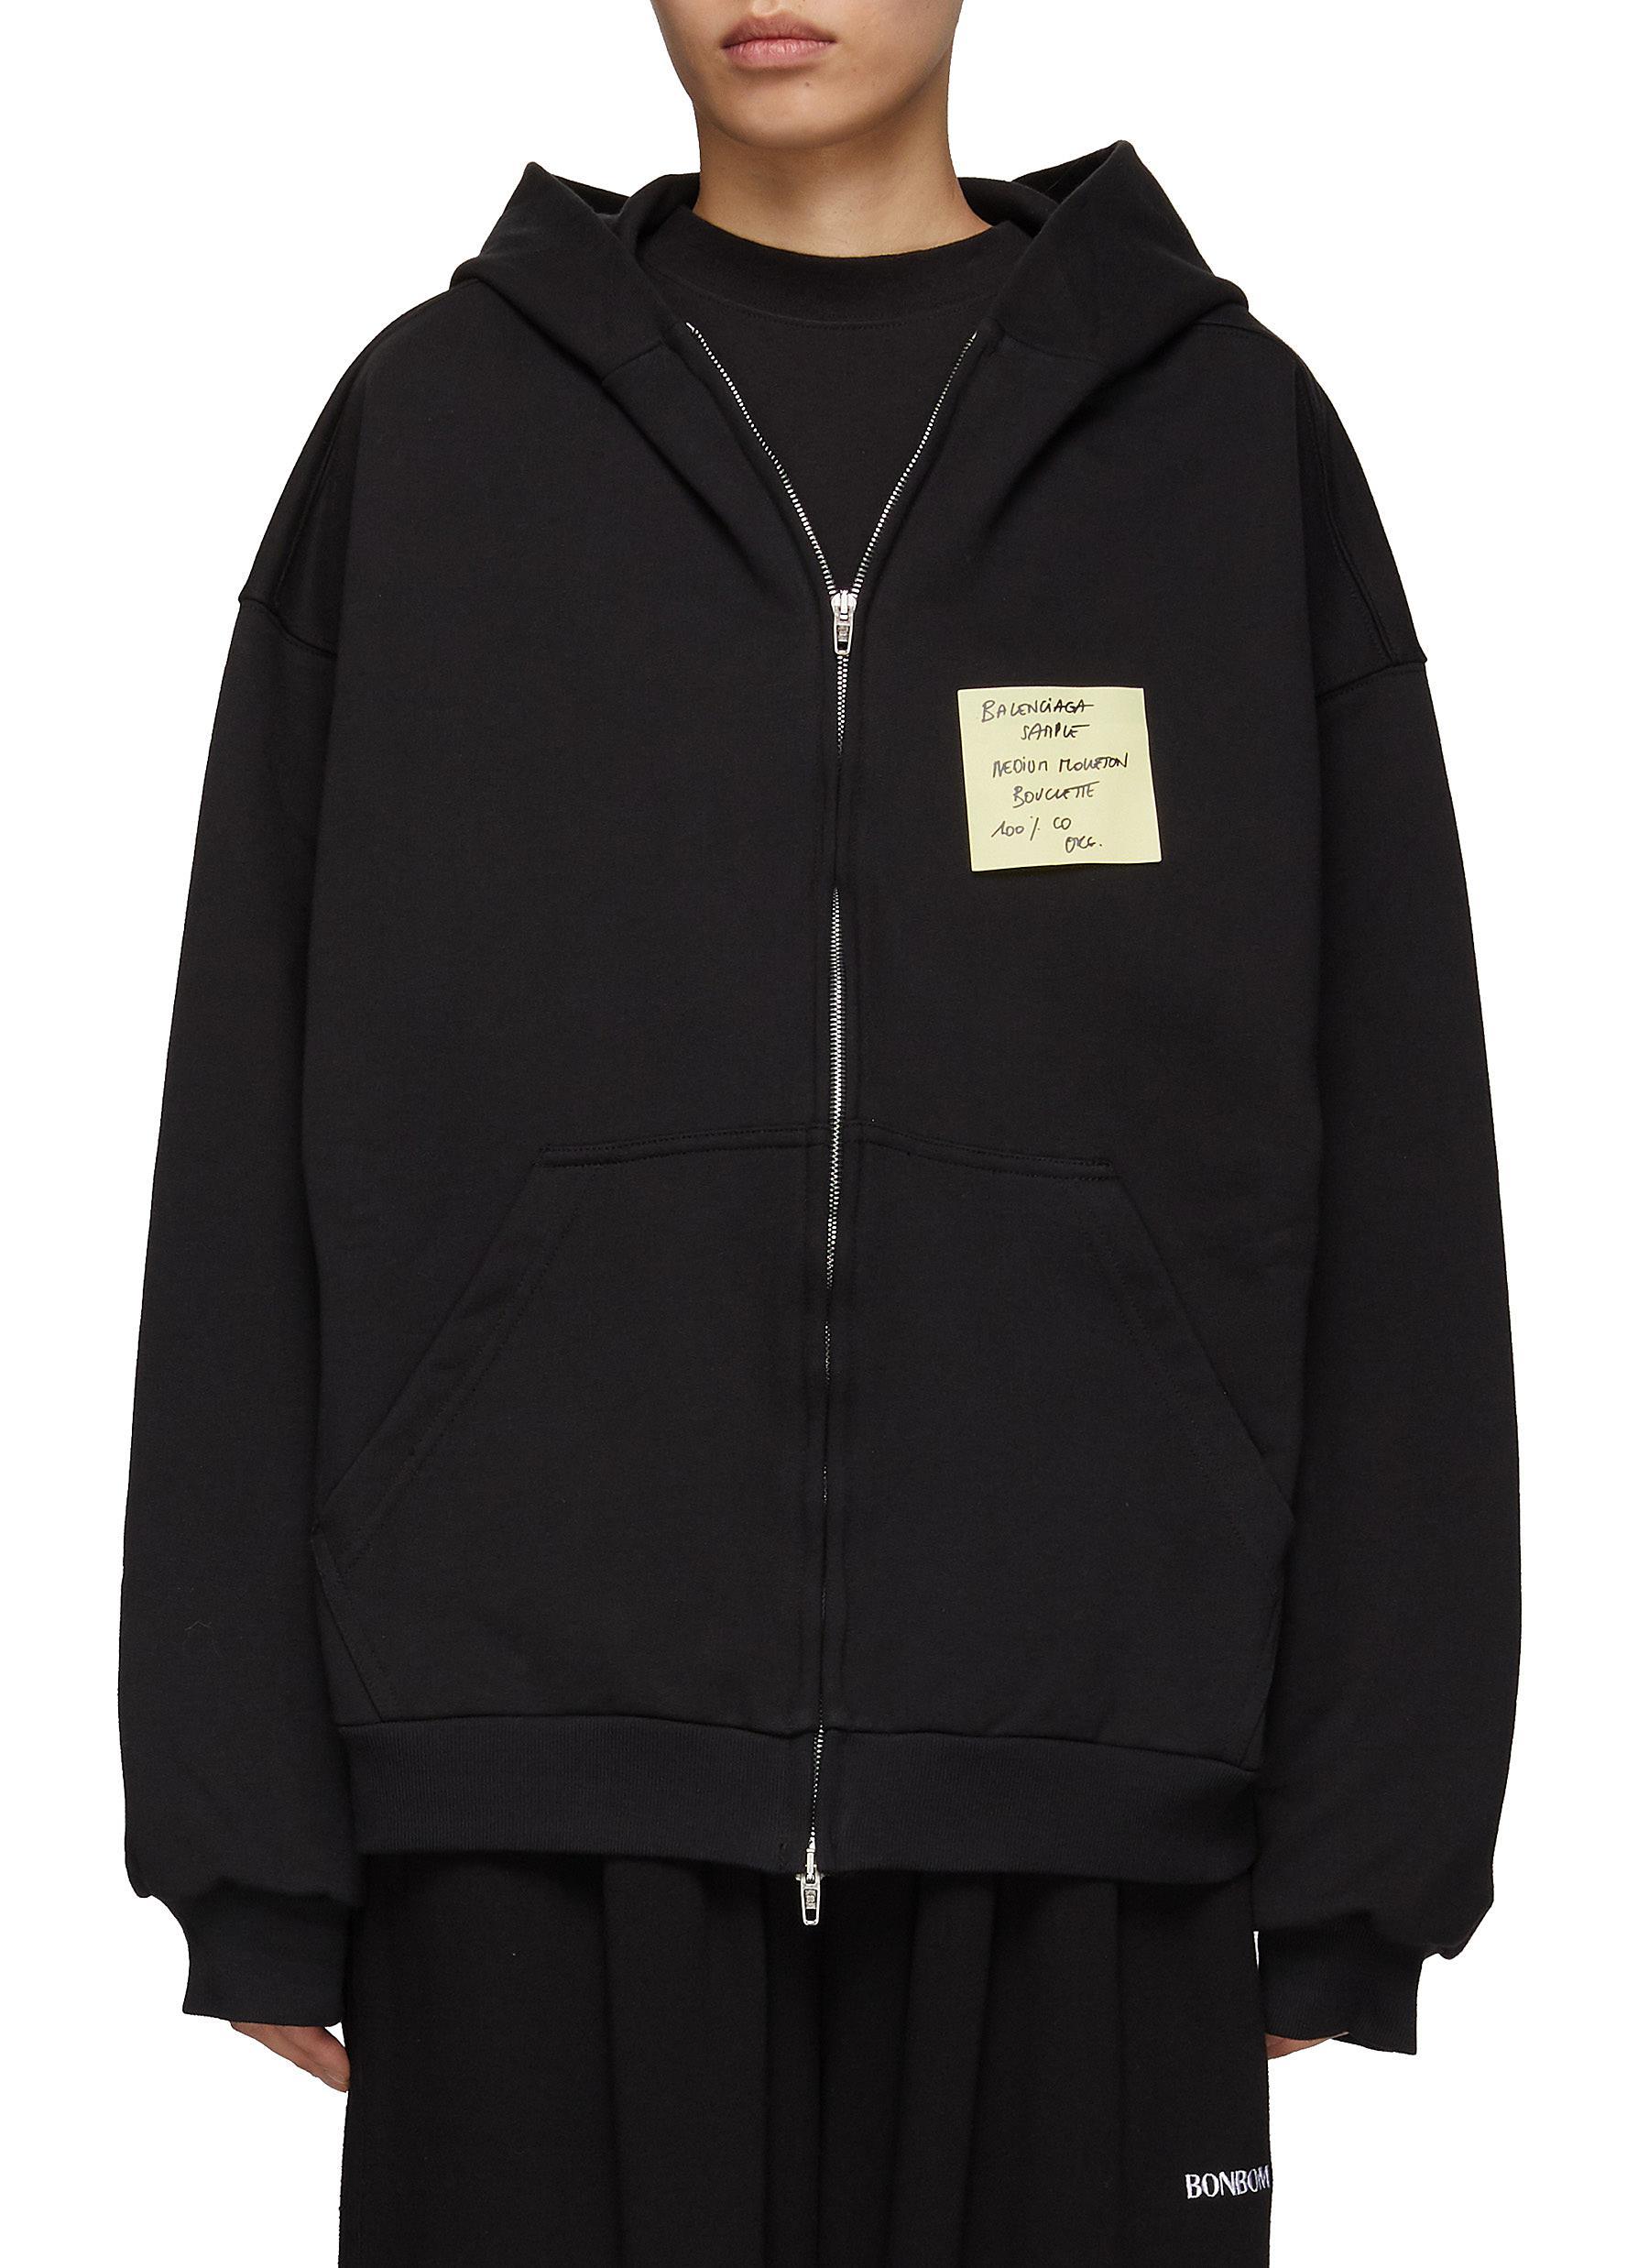 Balenciaga Sticky Note Zip Up Hoodie in Black | Lyst